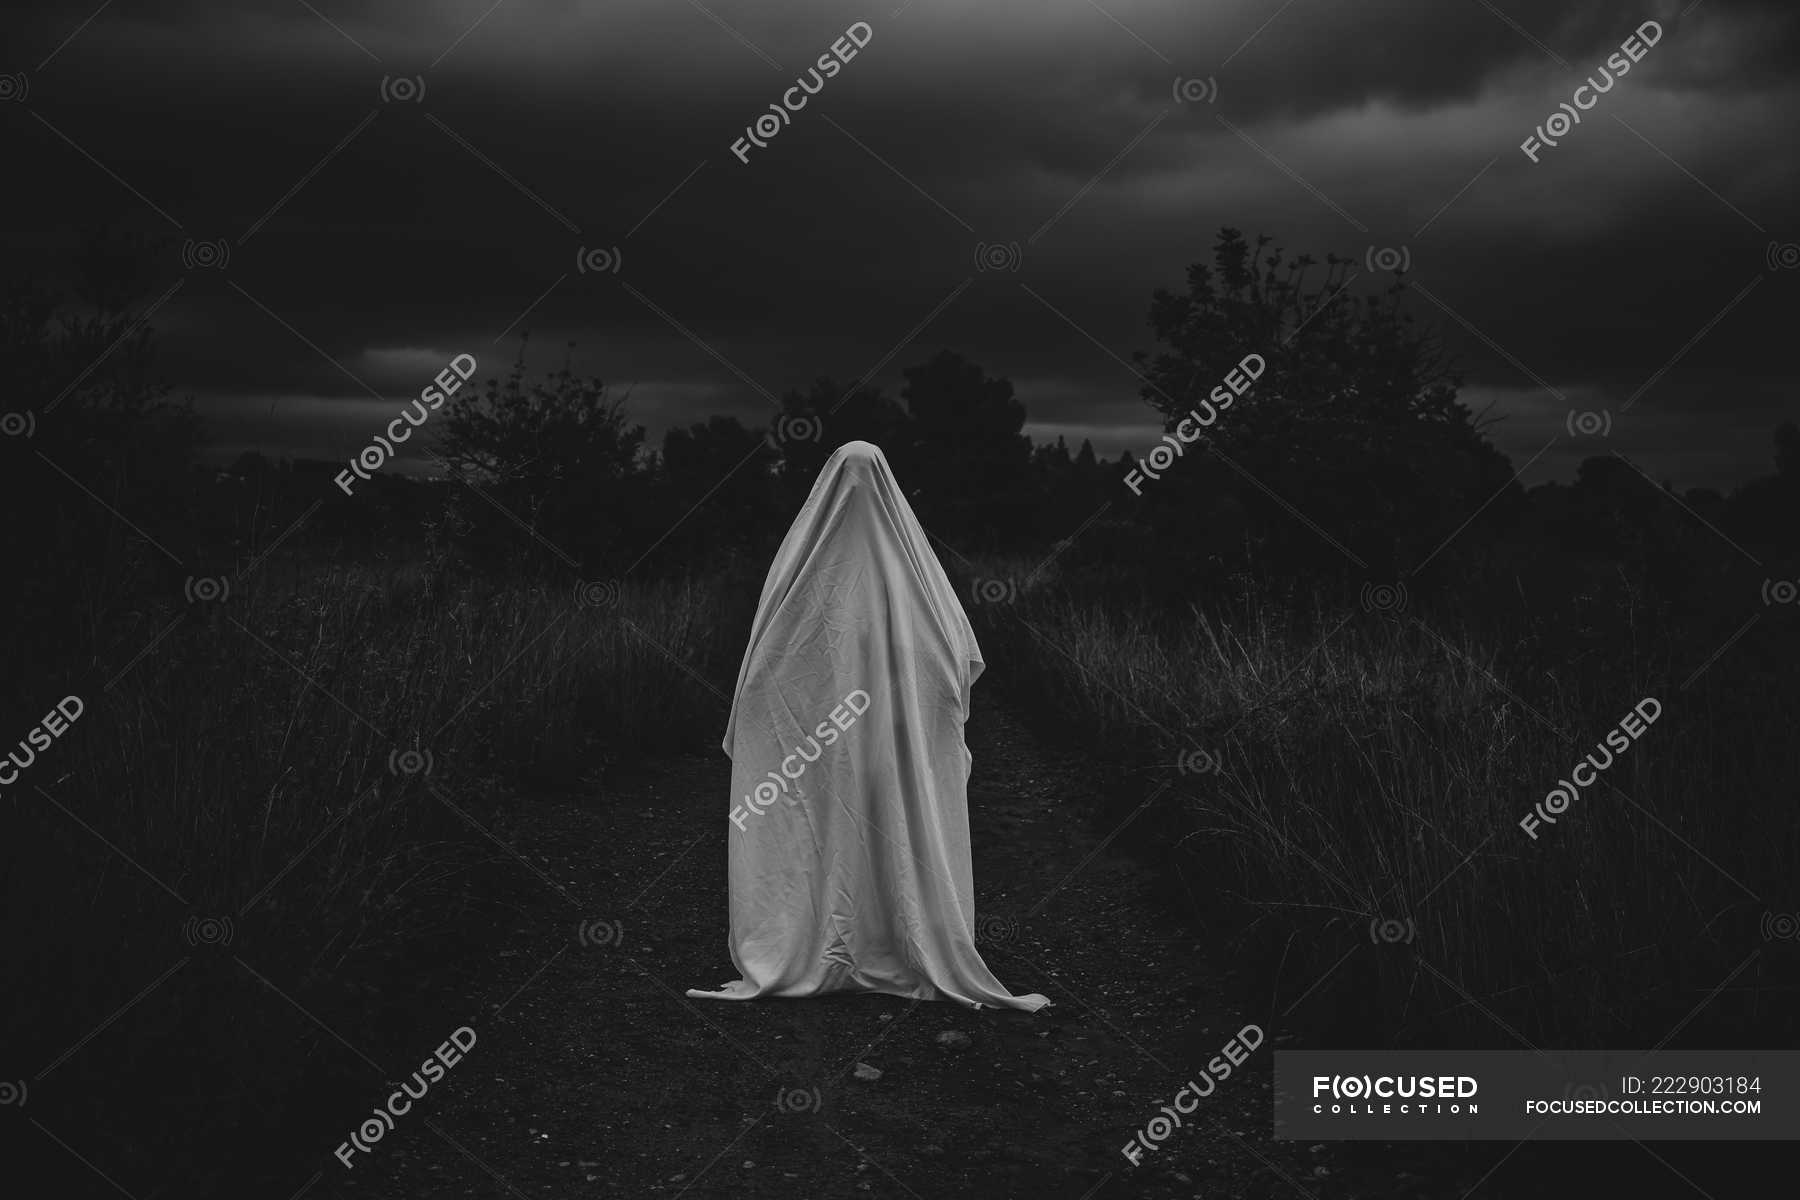 Udstyre Antibiotika Messing Person disguised as ghost walking on road in countryside — shadow, cloudy  sky - Stock Photo | #222903184